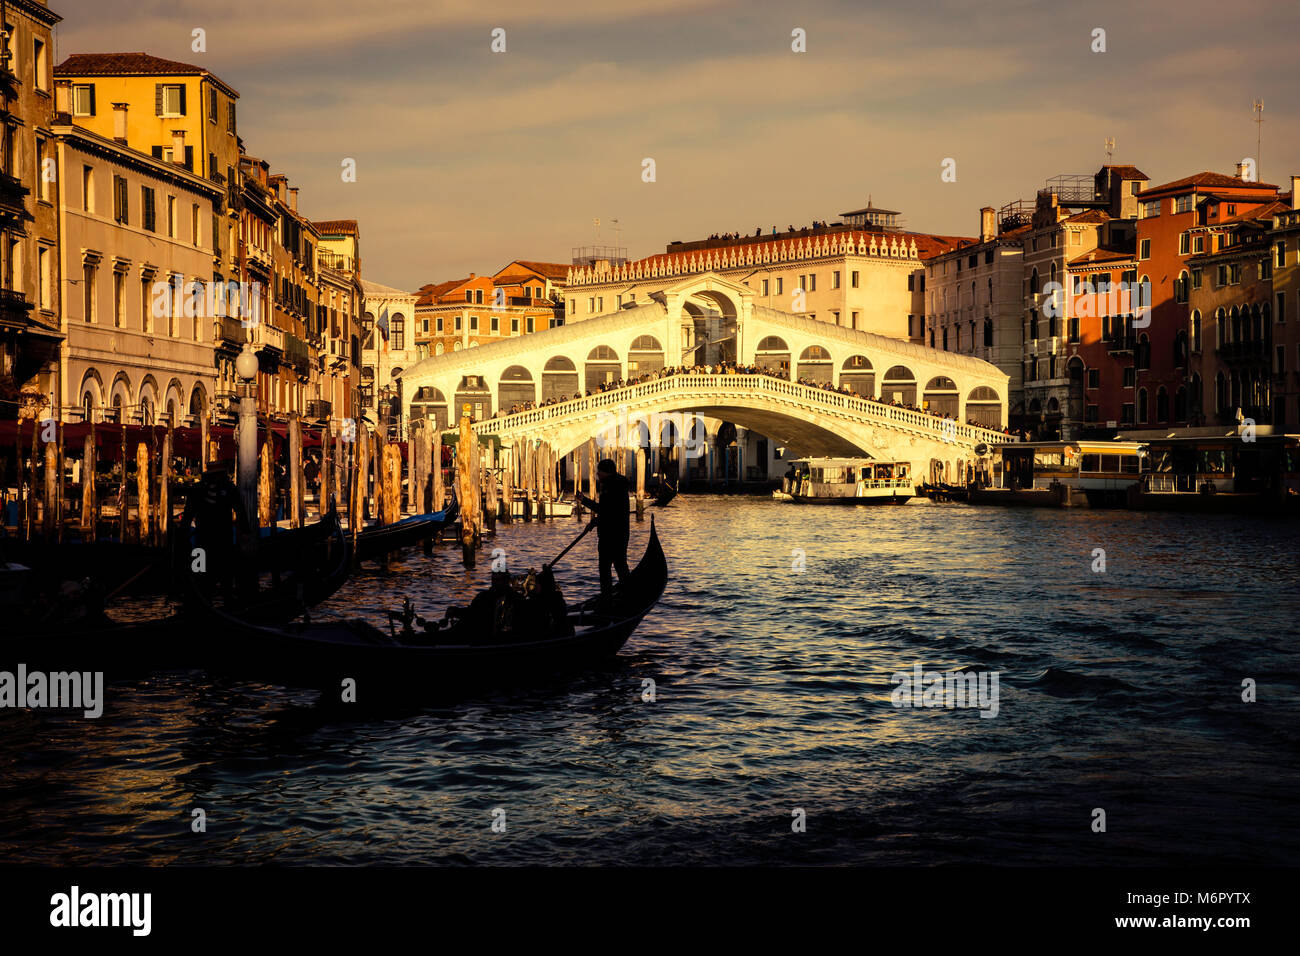 Wonderful view of Grand Canal and palaces during sunset, Venice, Italy. Stock Photo